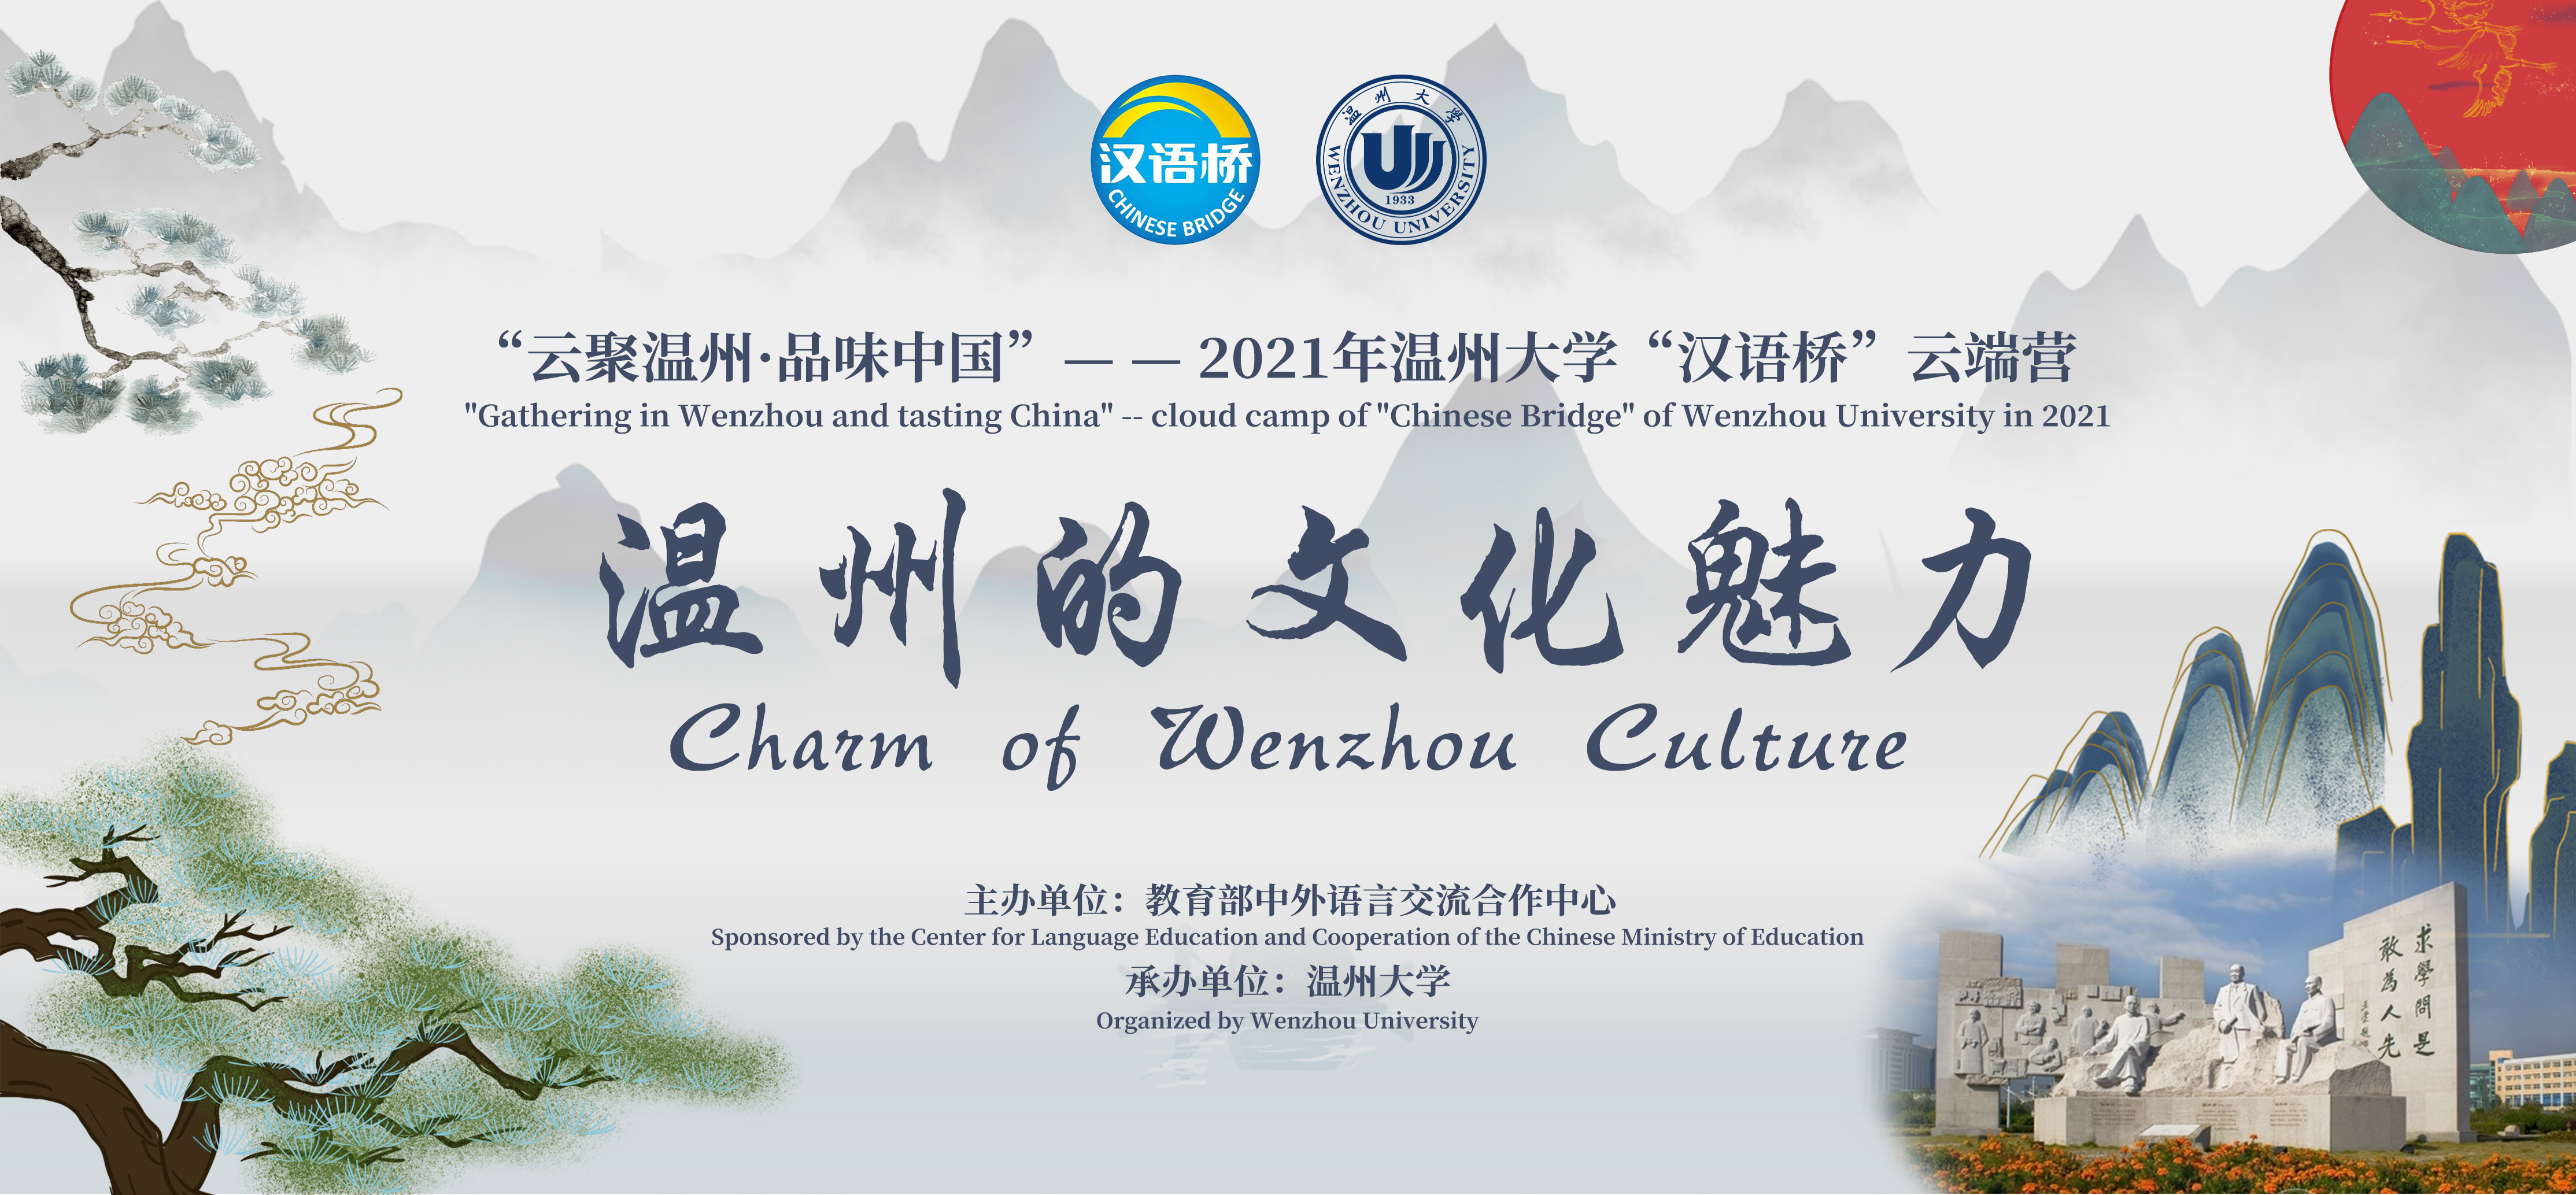 Charm of Wenzhou Culture